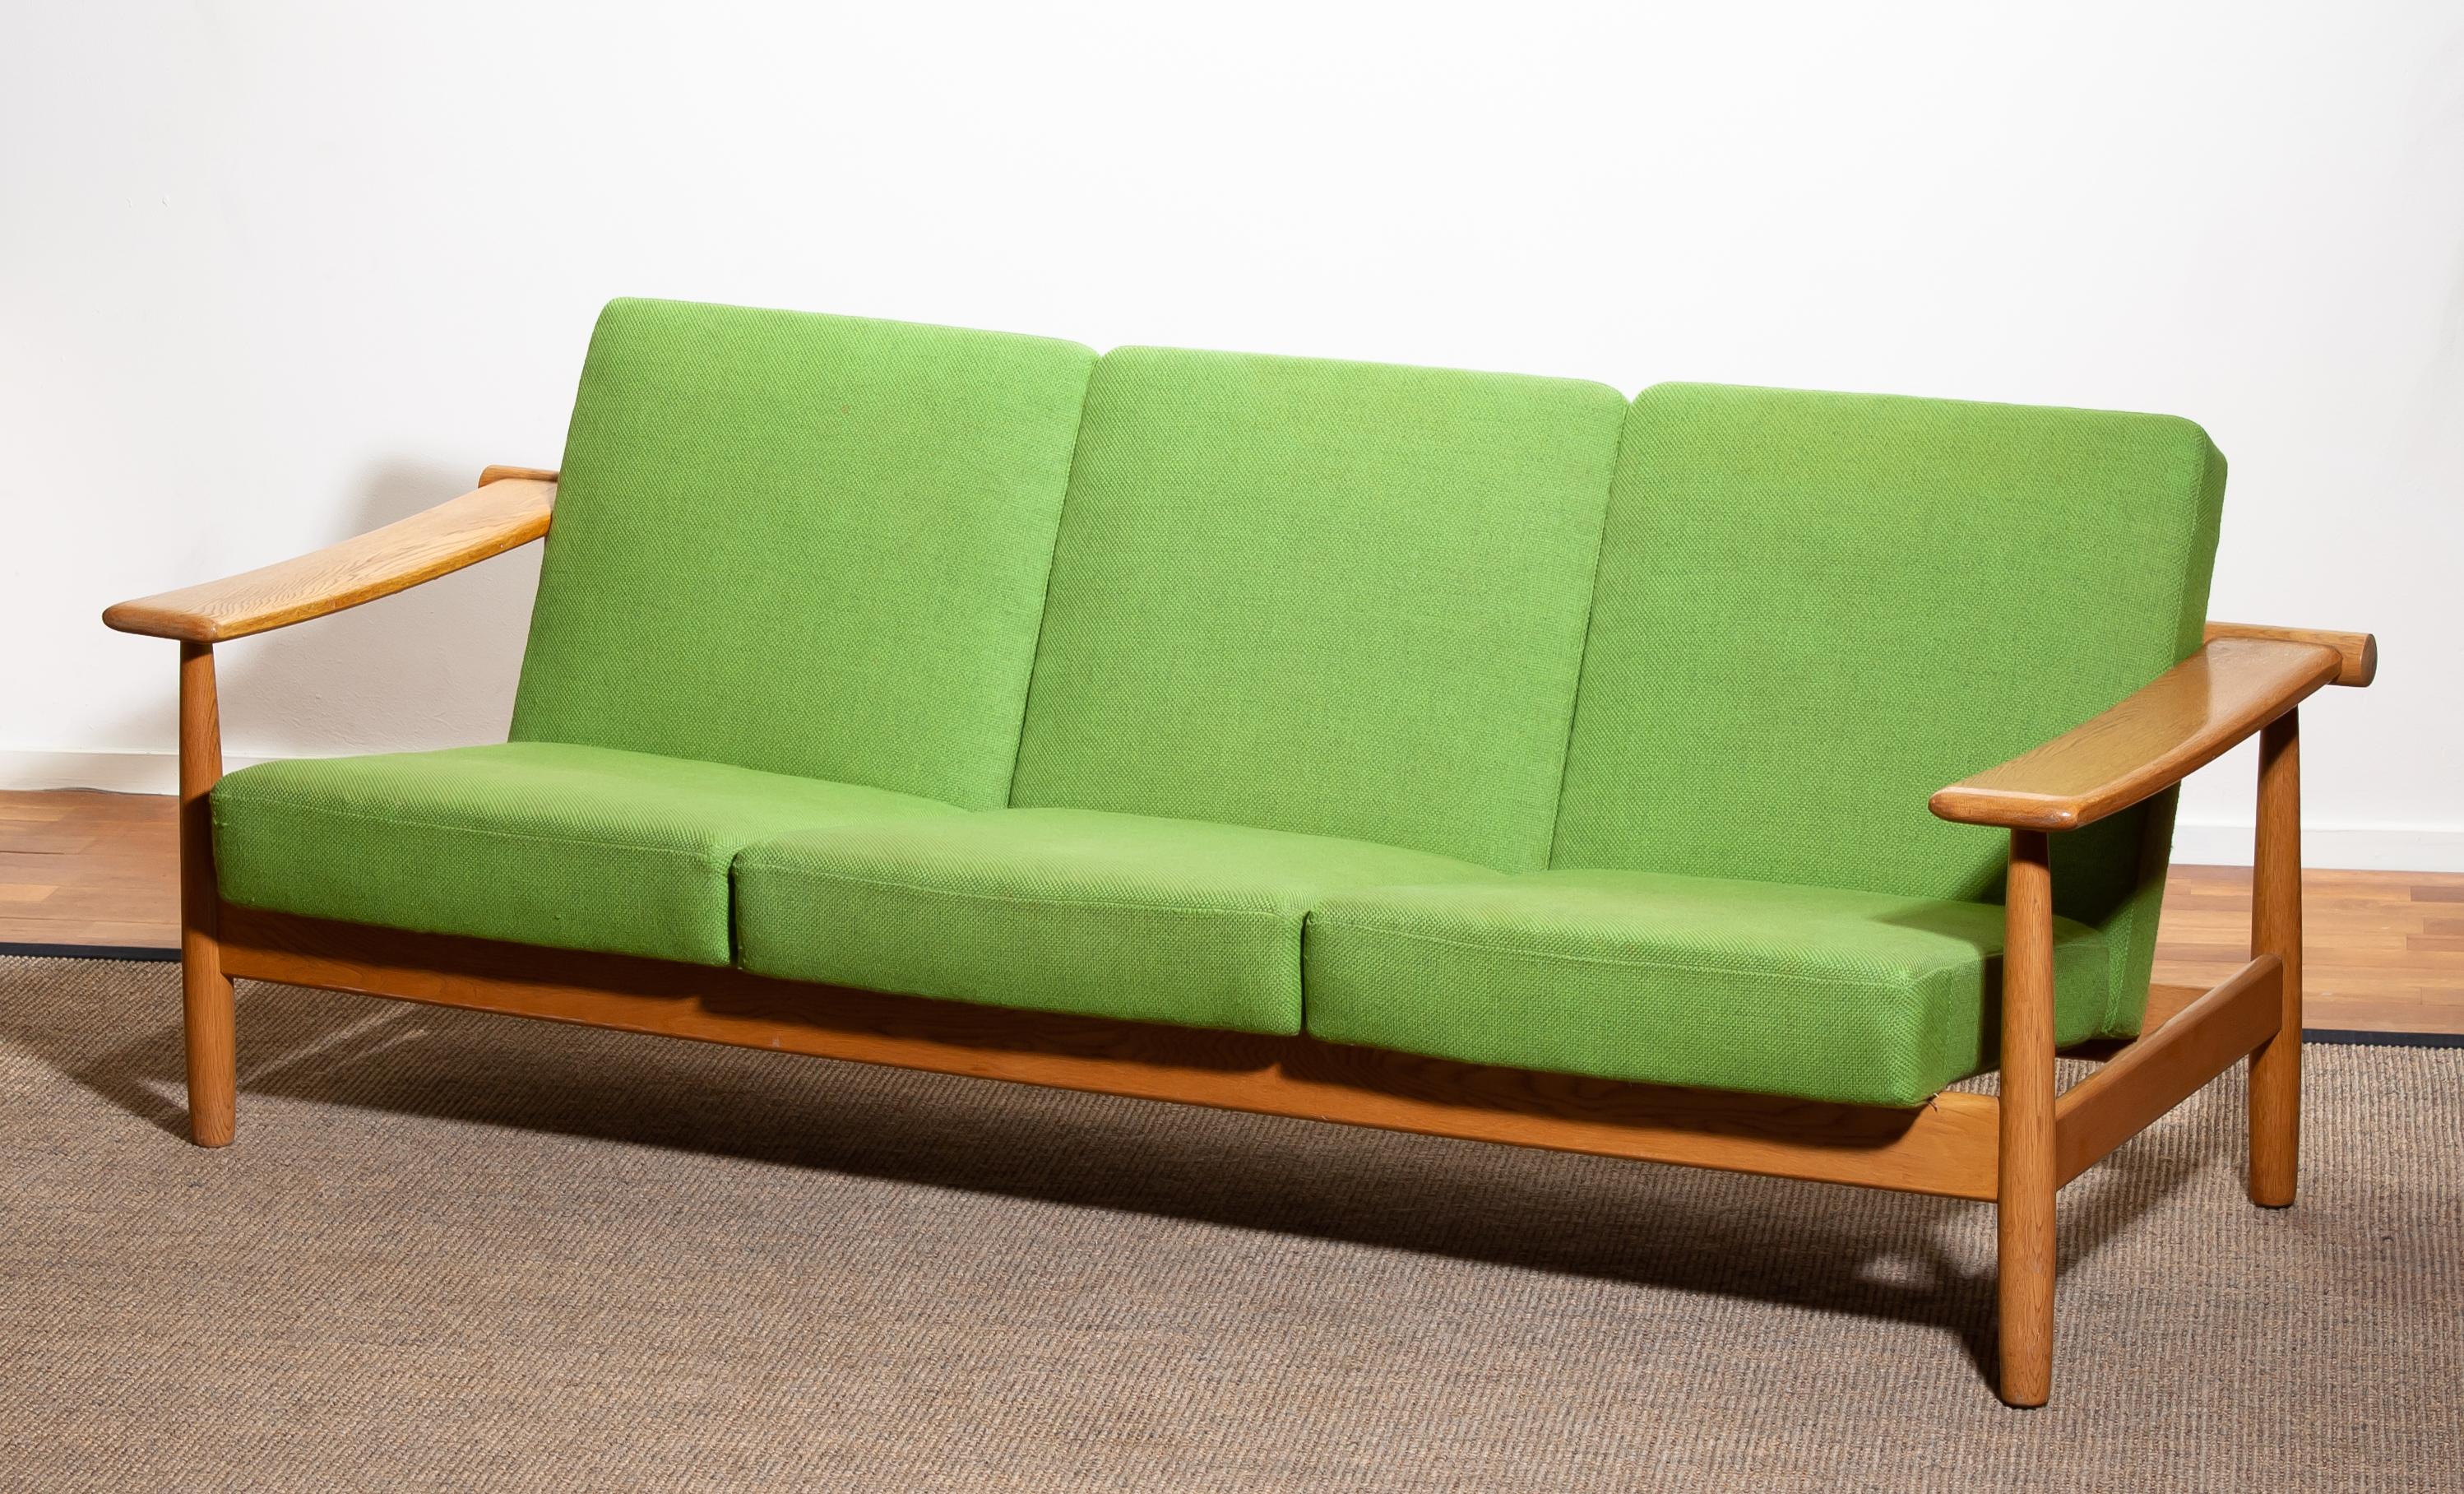 1960s, Oak Sofa and Lounge Chair/Living Room Set from Denmark in GETAMA Style 8